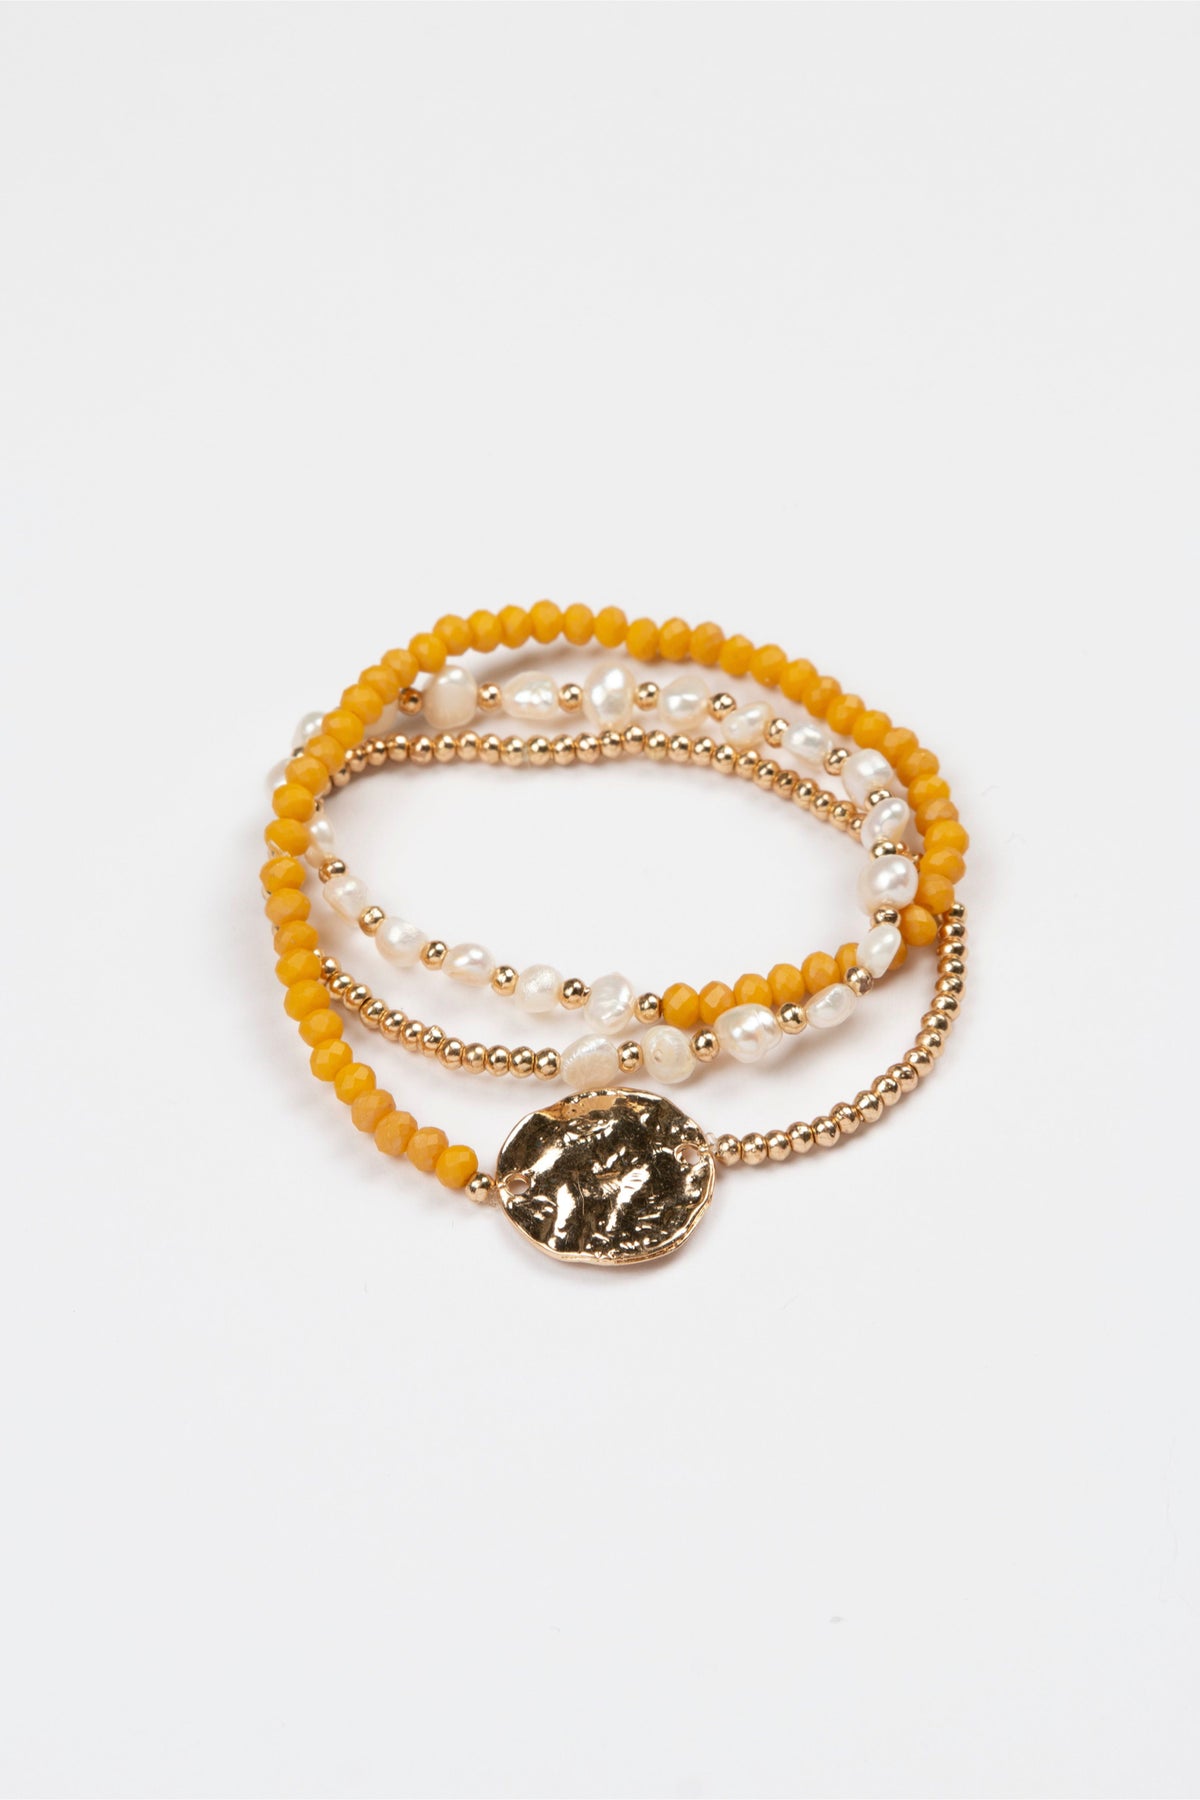 Wrap Bracelet Gold Pearls and Mustard Beads with Gold Disc